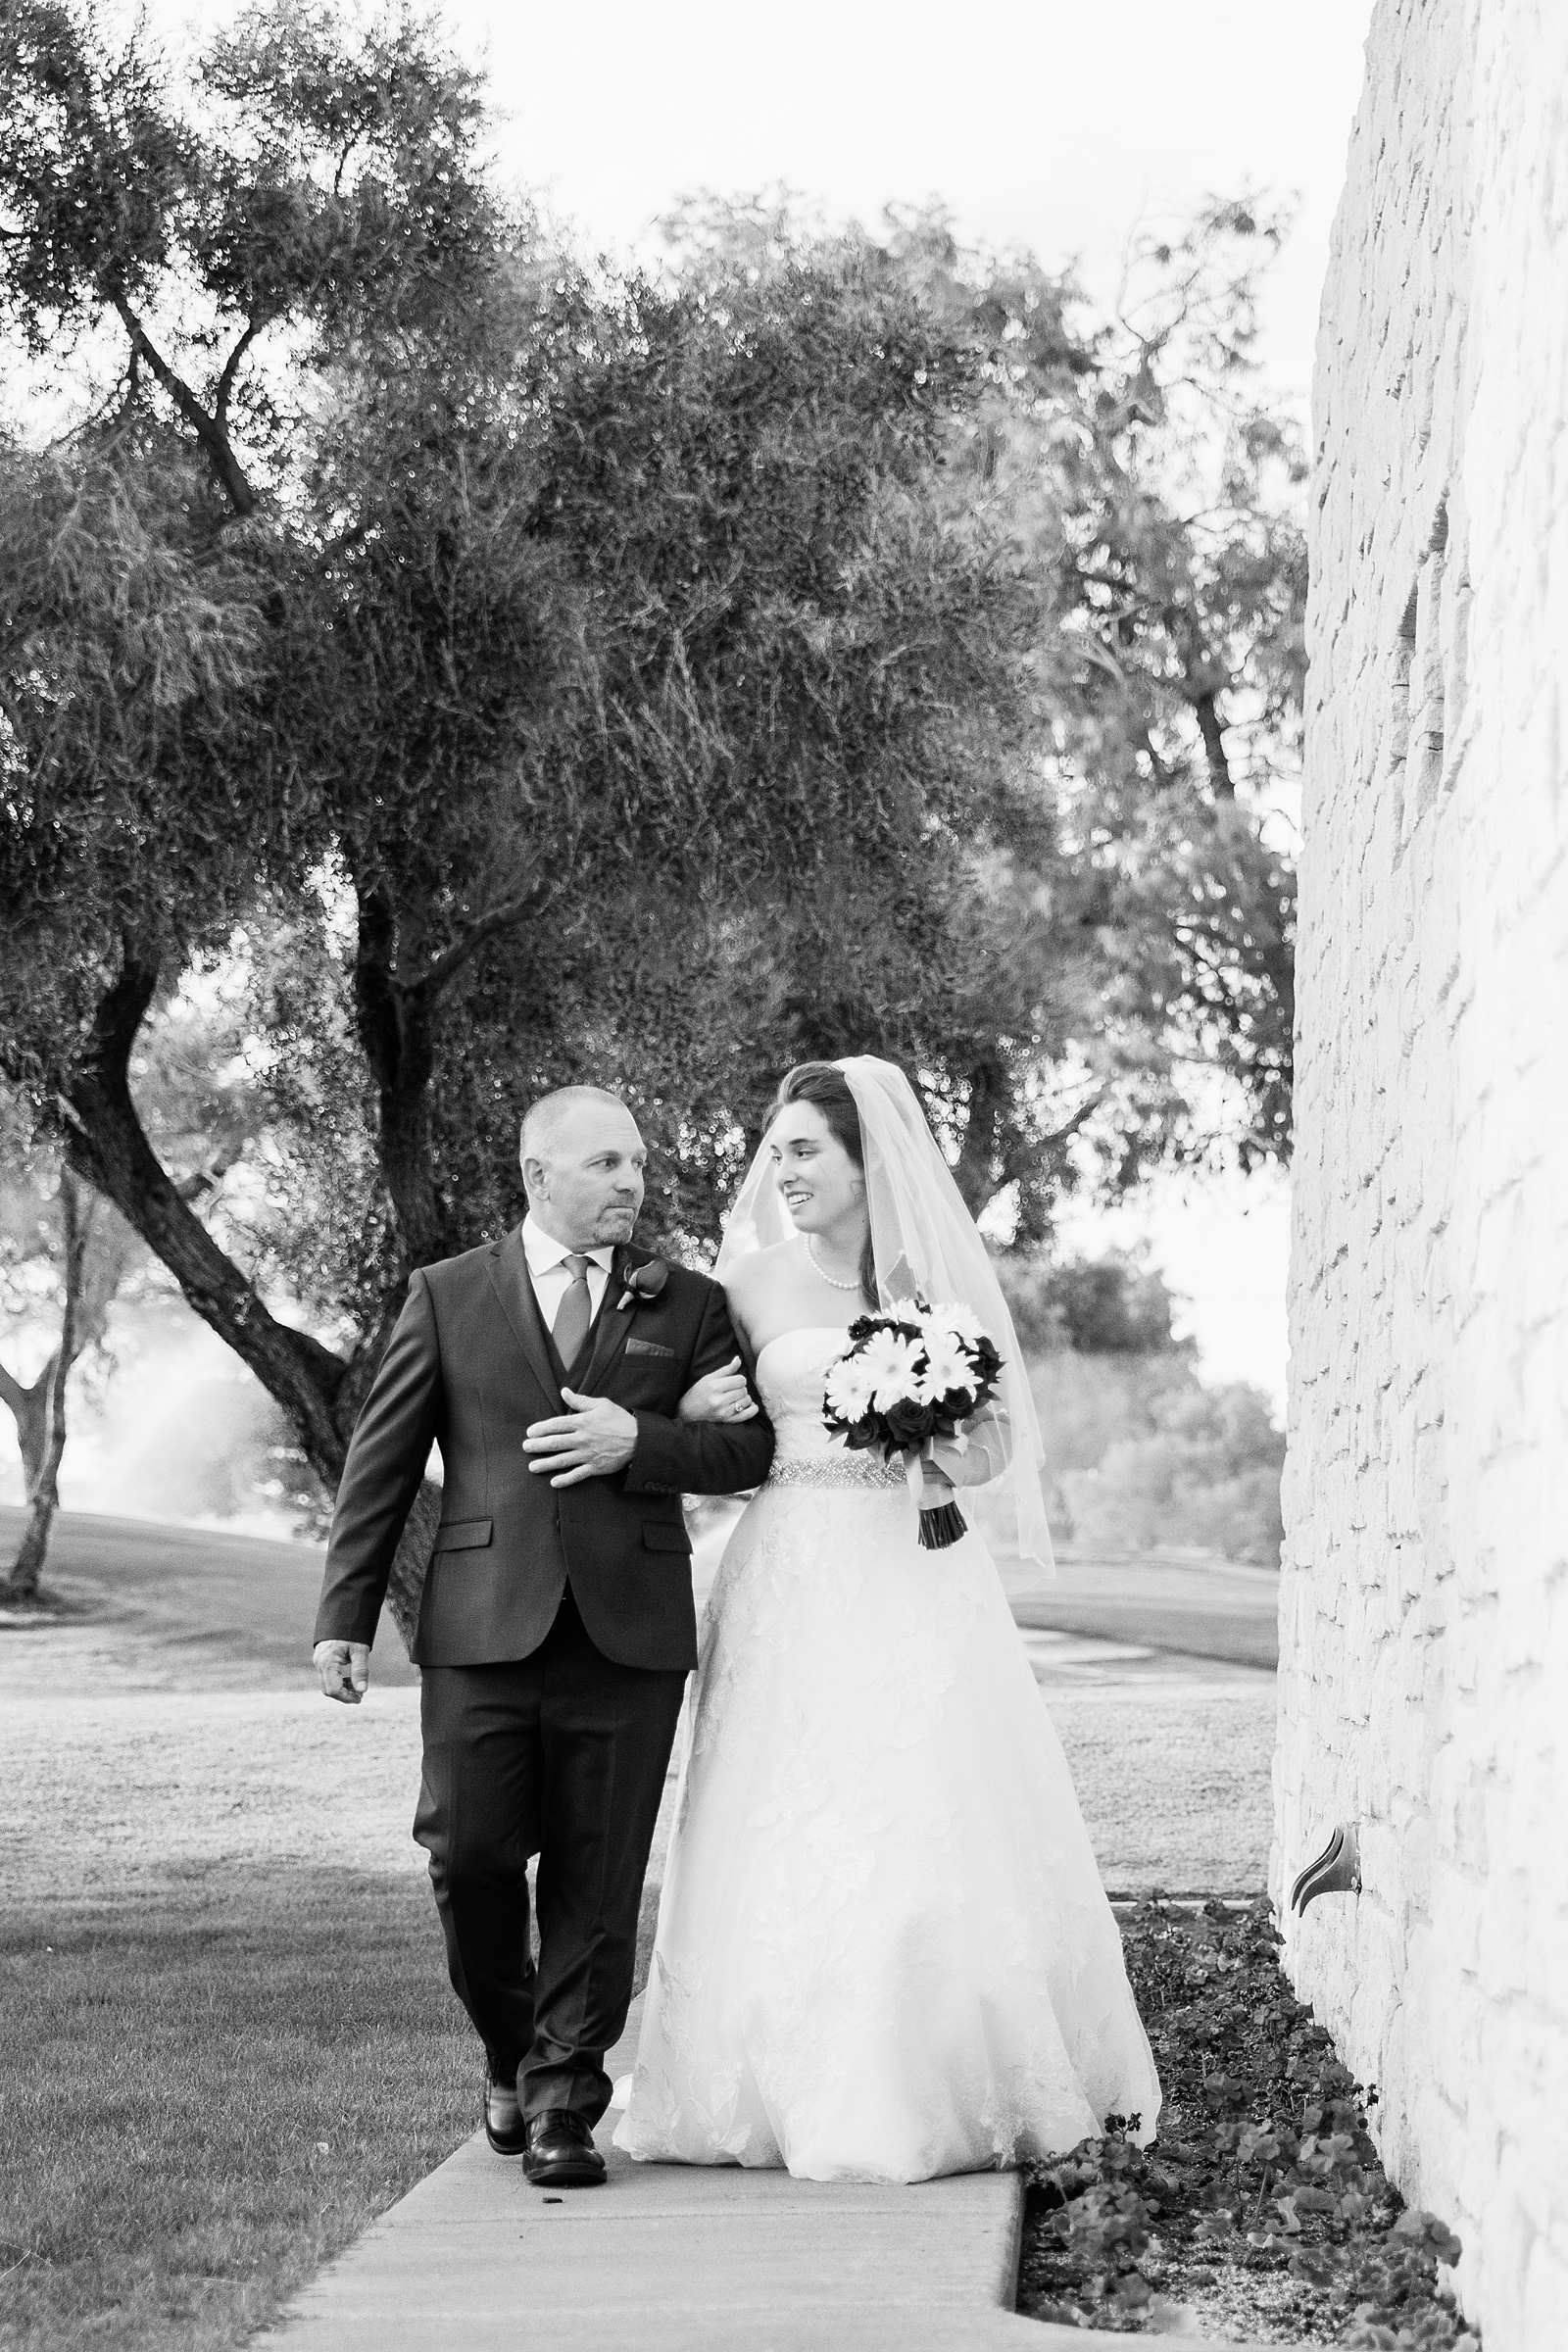 Bride moments before she walks down the aisle with her father at an Ocotillo Oasis wedding ceremony by Arizona wedding photographer PMA Photography.